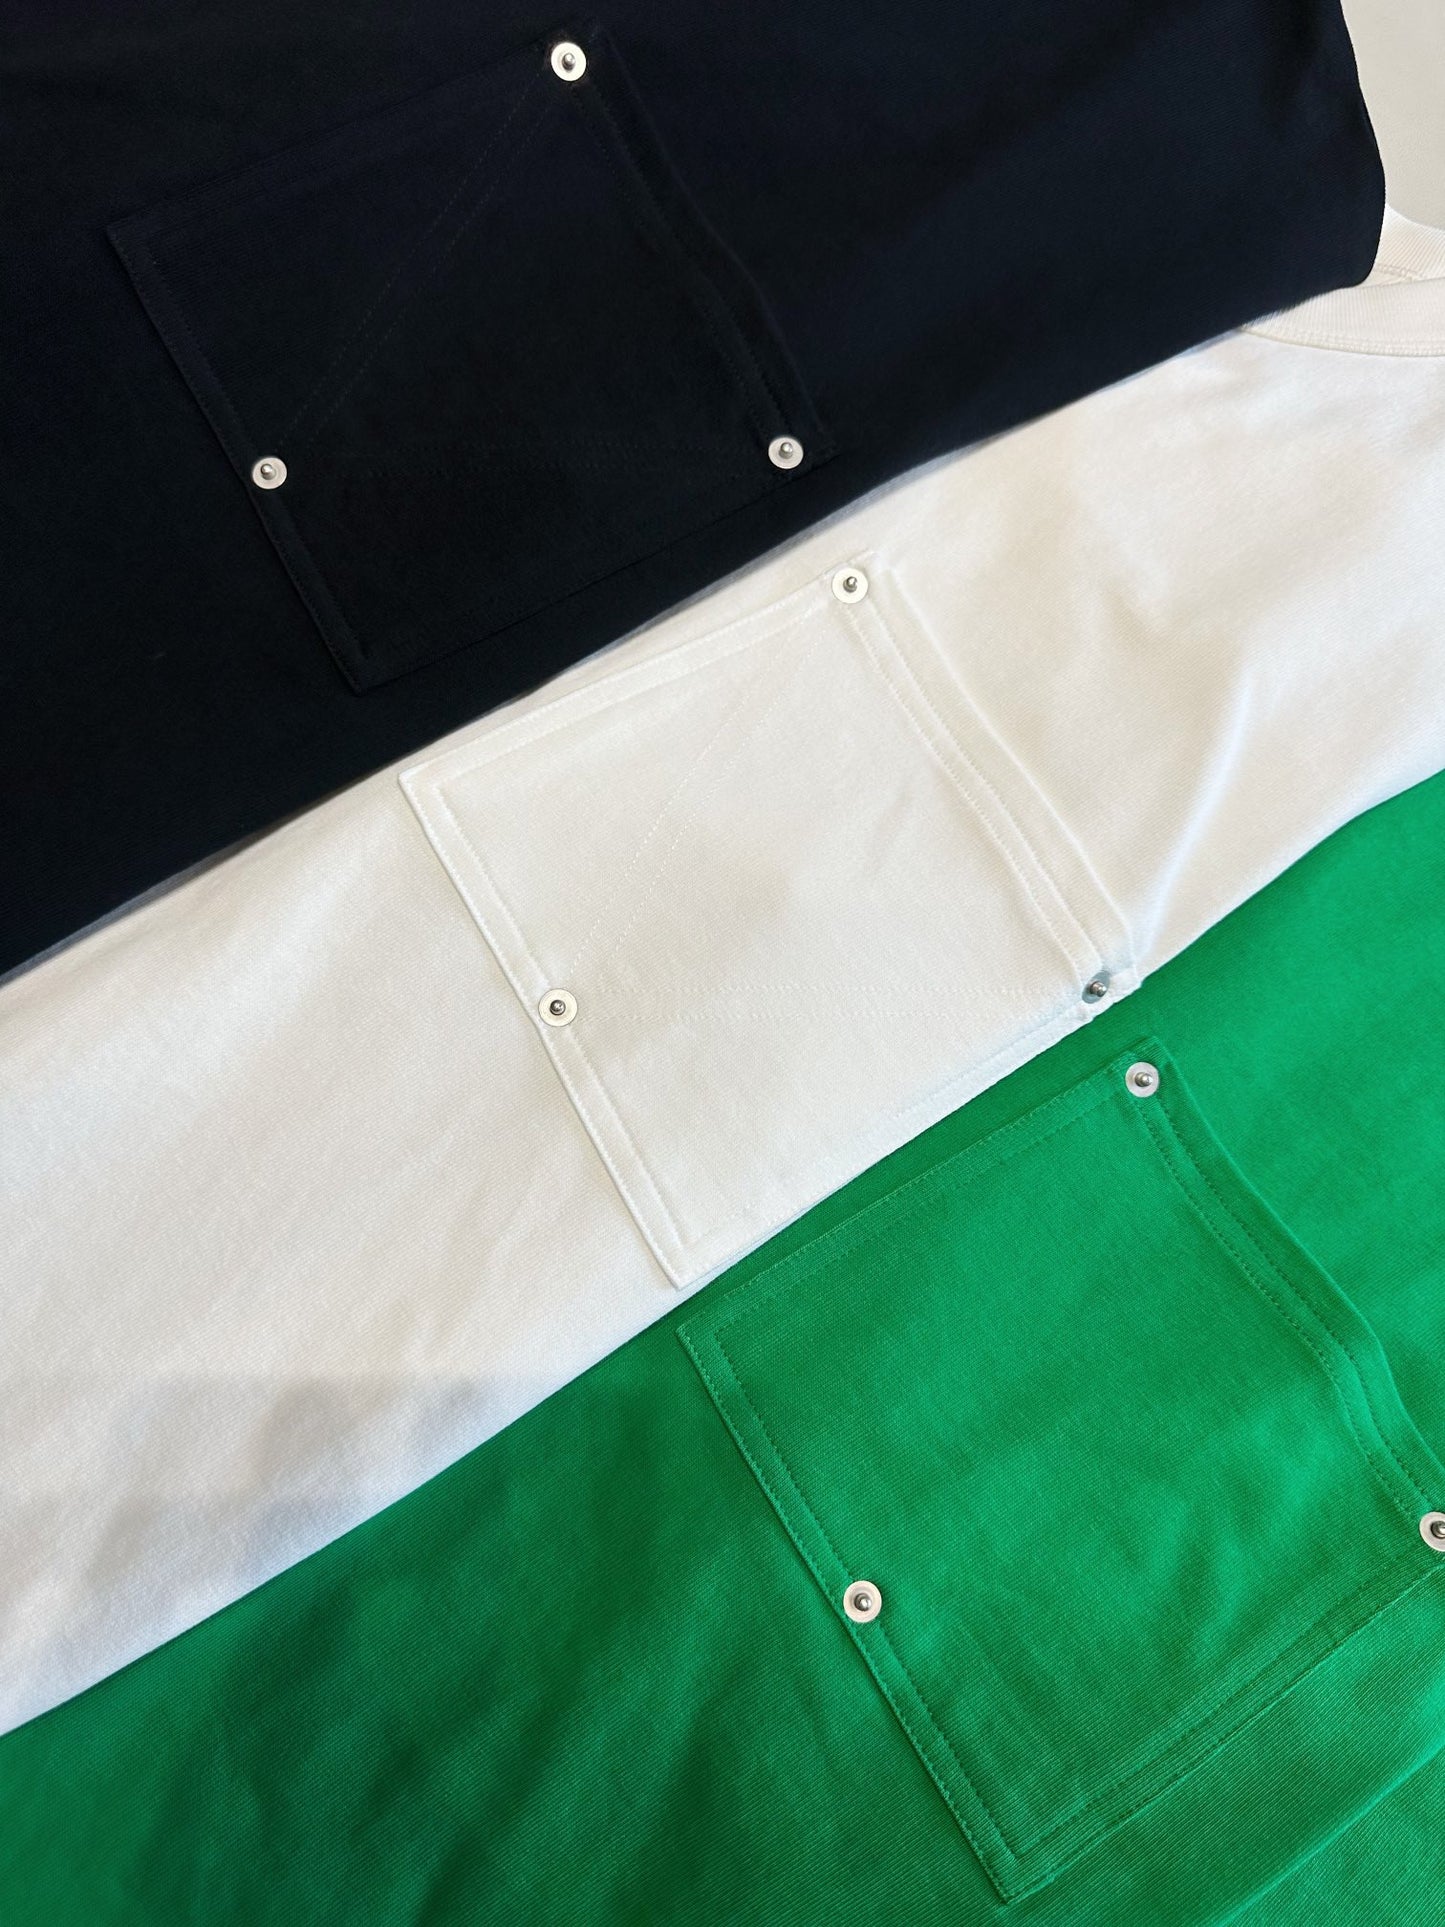 Black,White and Green  T-shirt